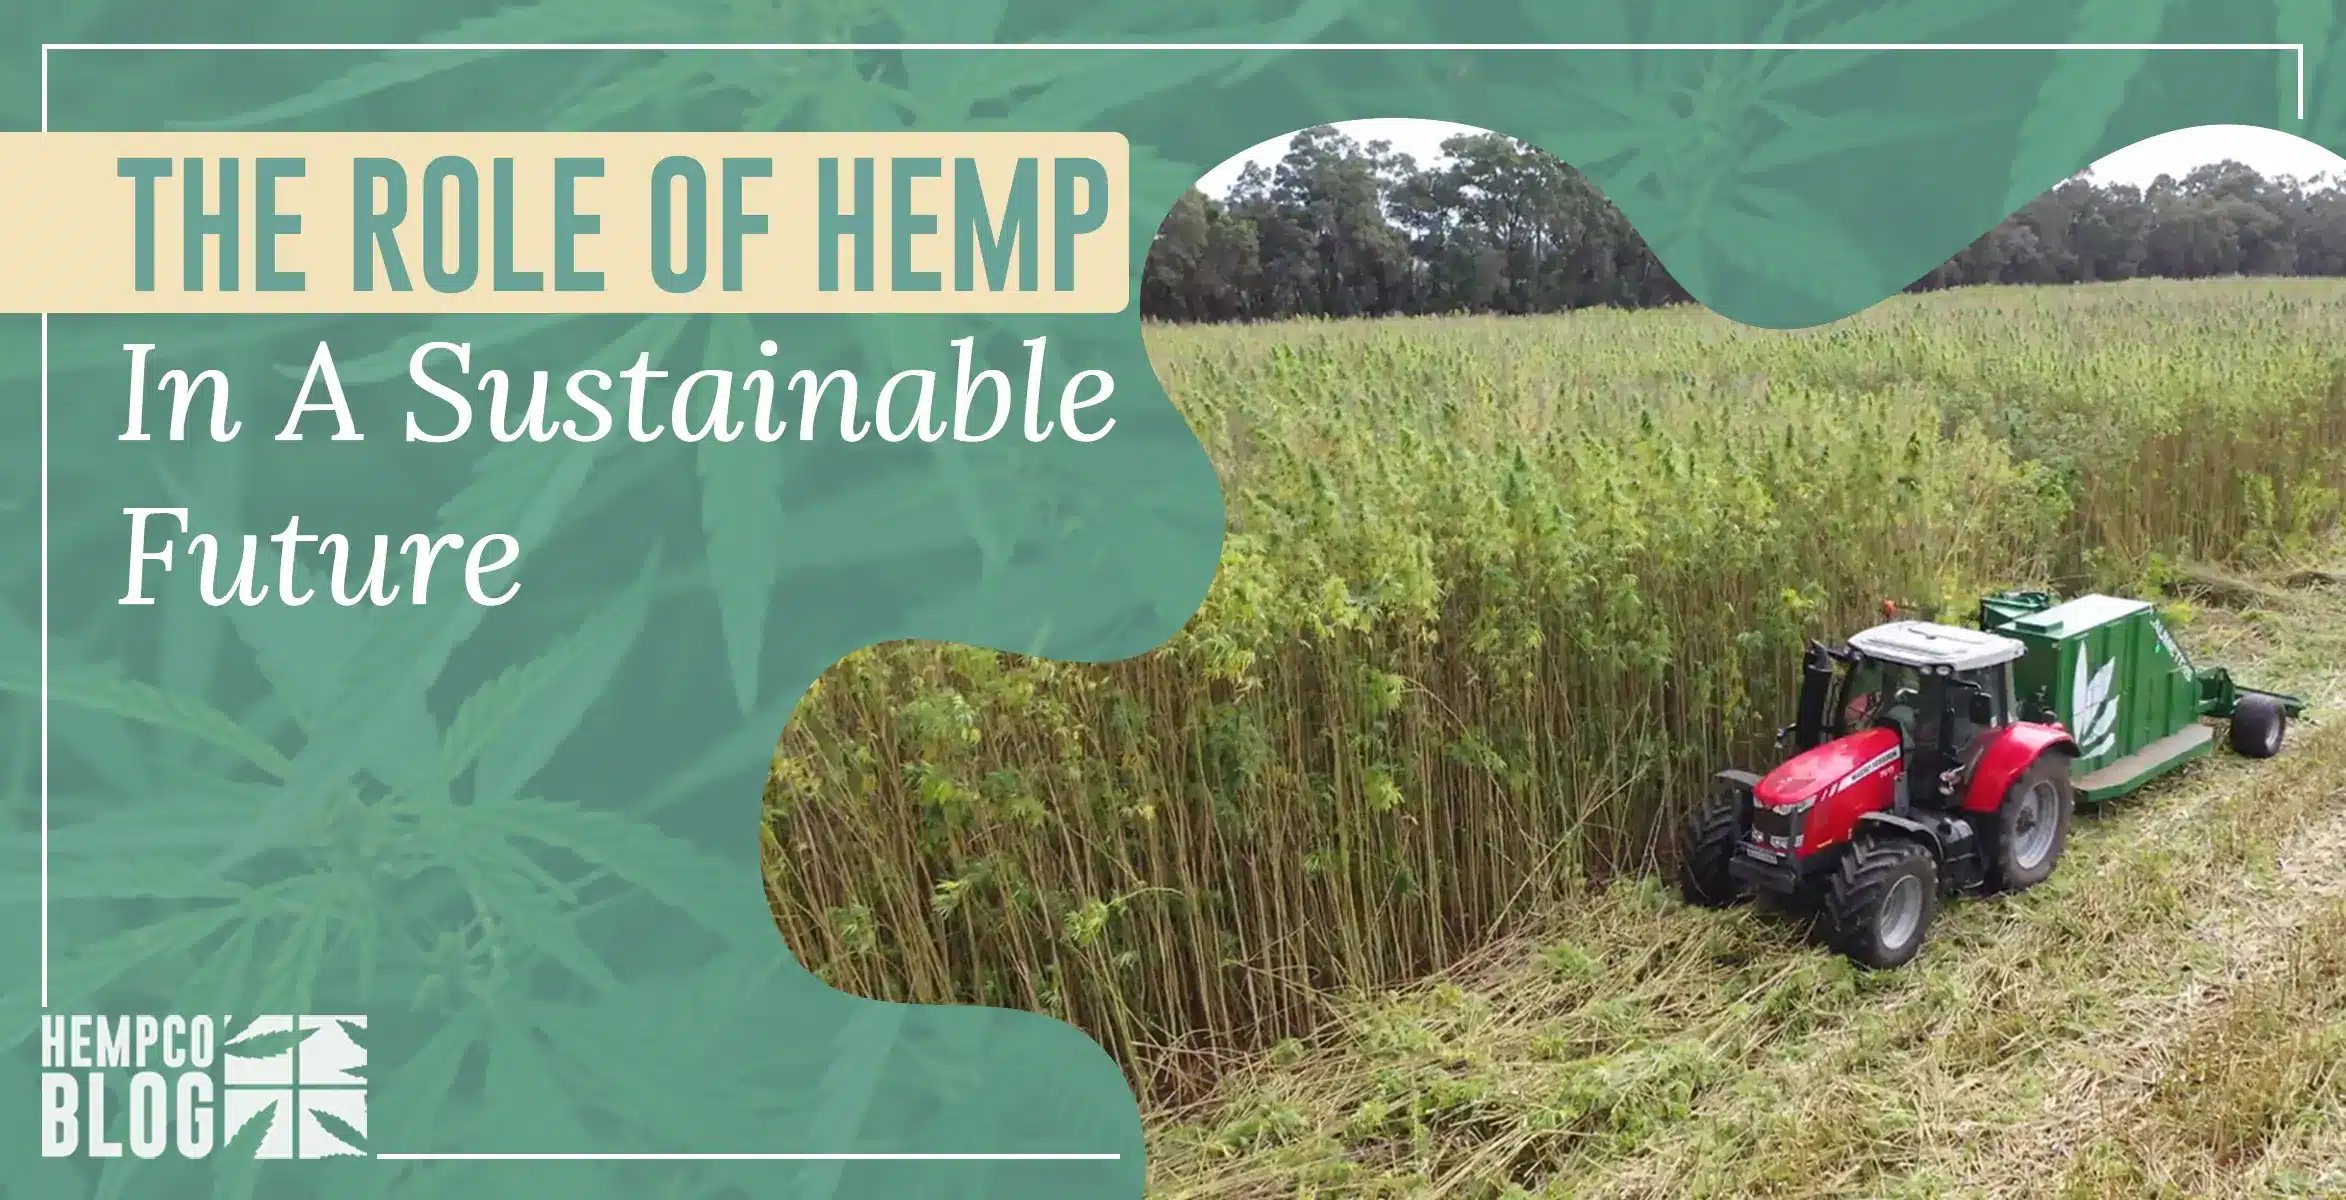 The Role of Hemp in a Sustainable Future